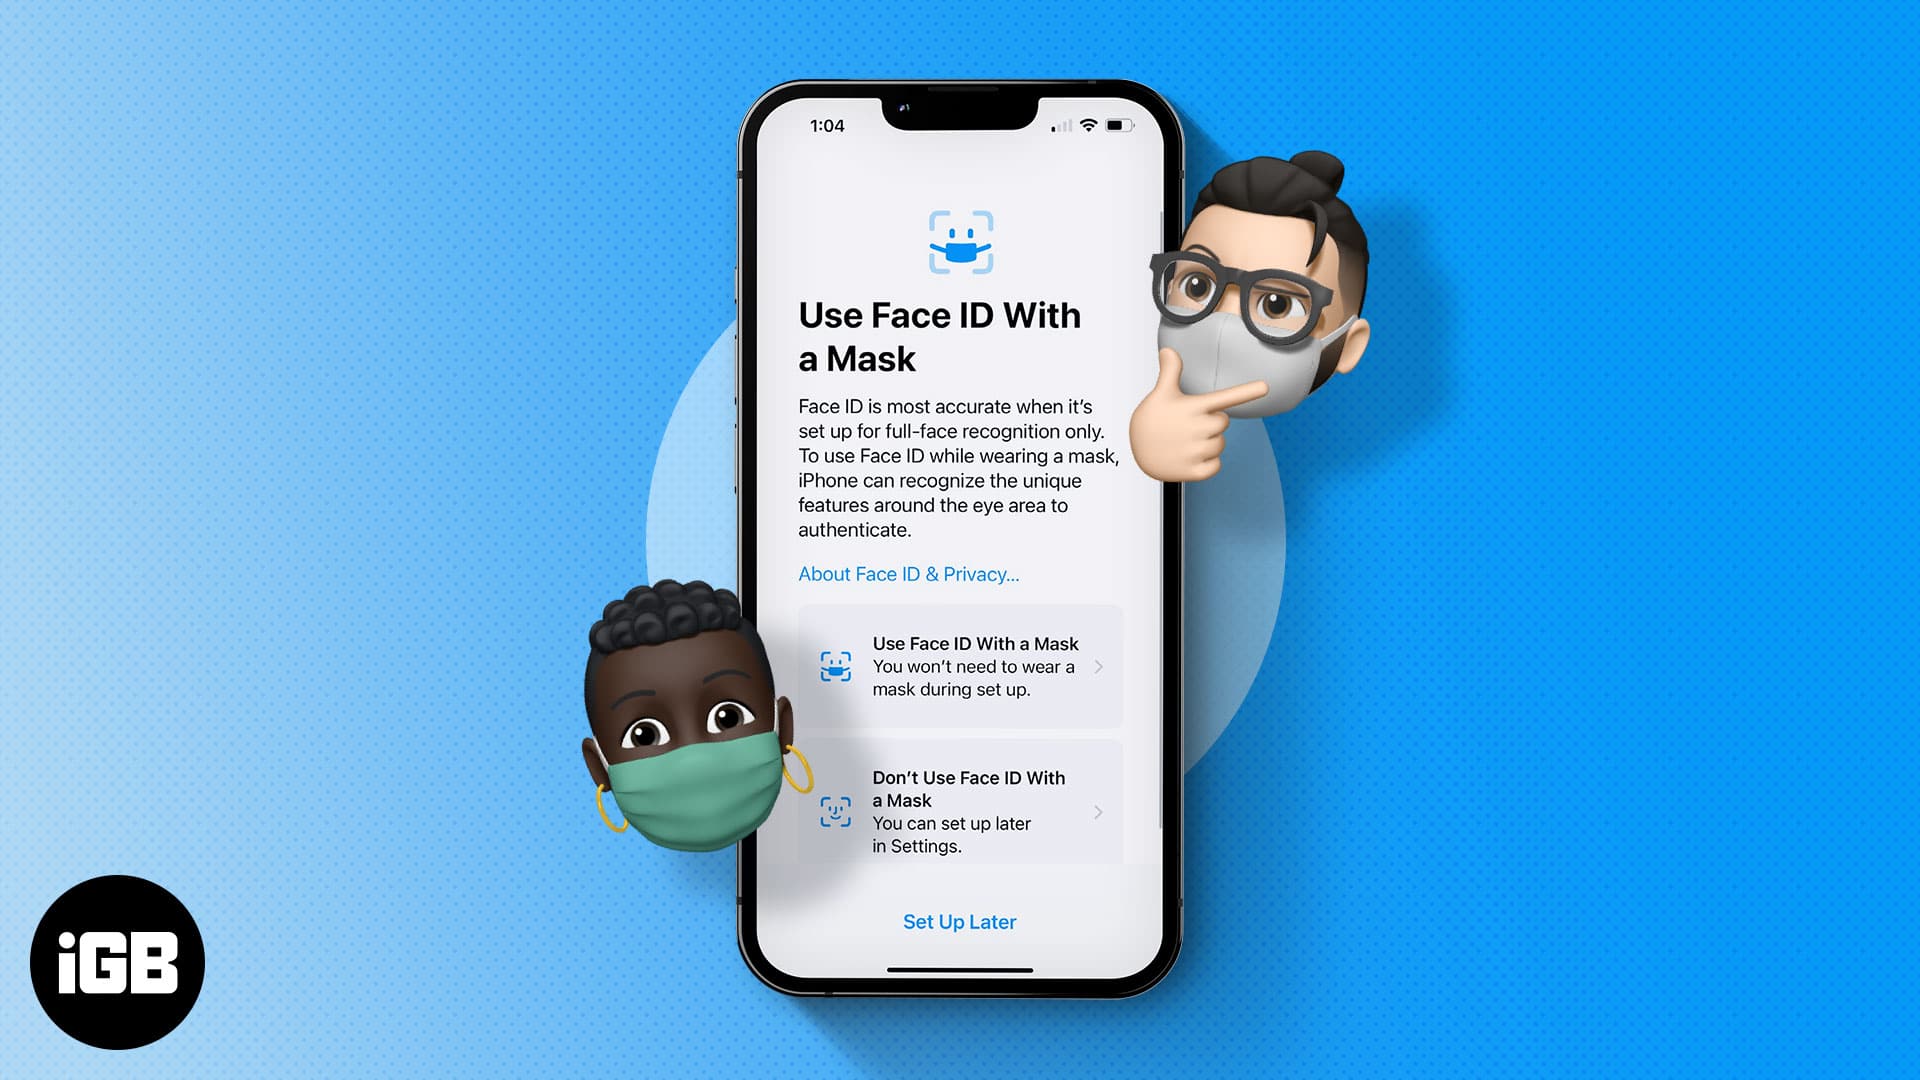 How to Unlock Your iPhone With Face ID While Wearing a Mask